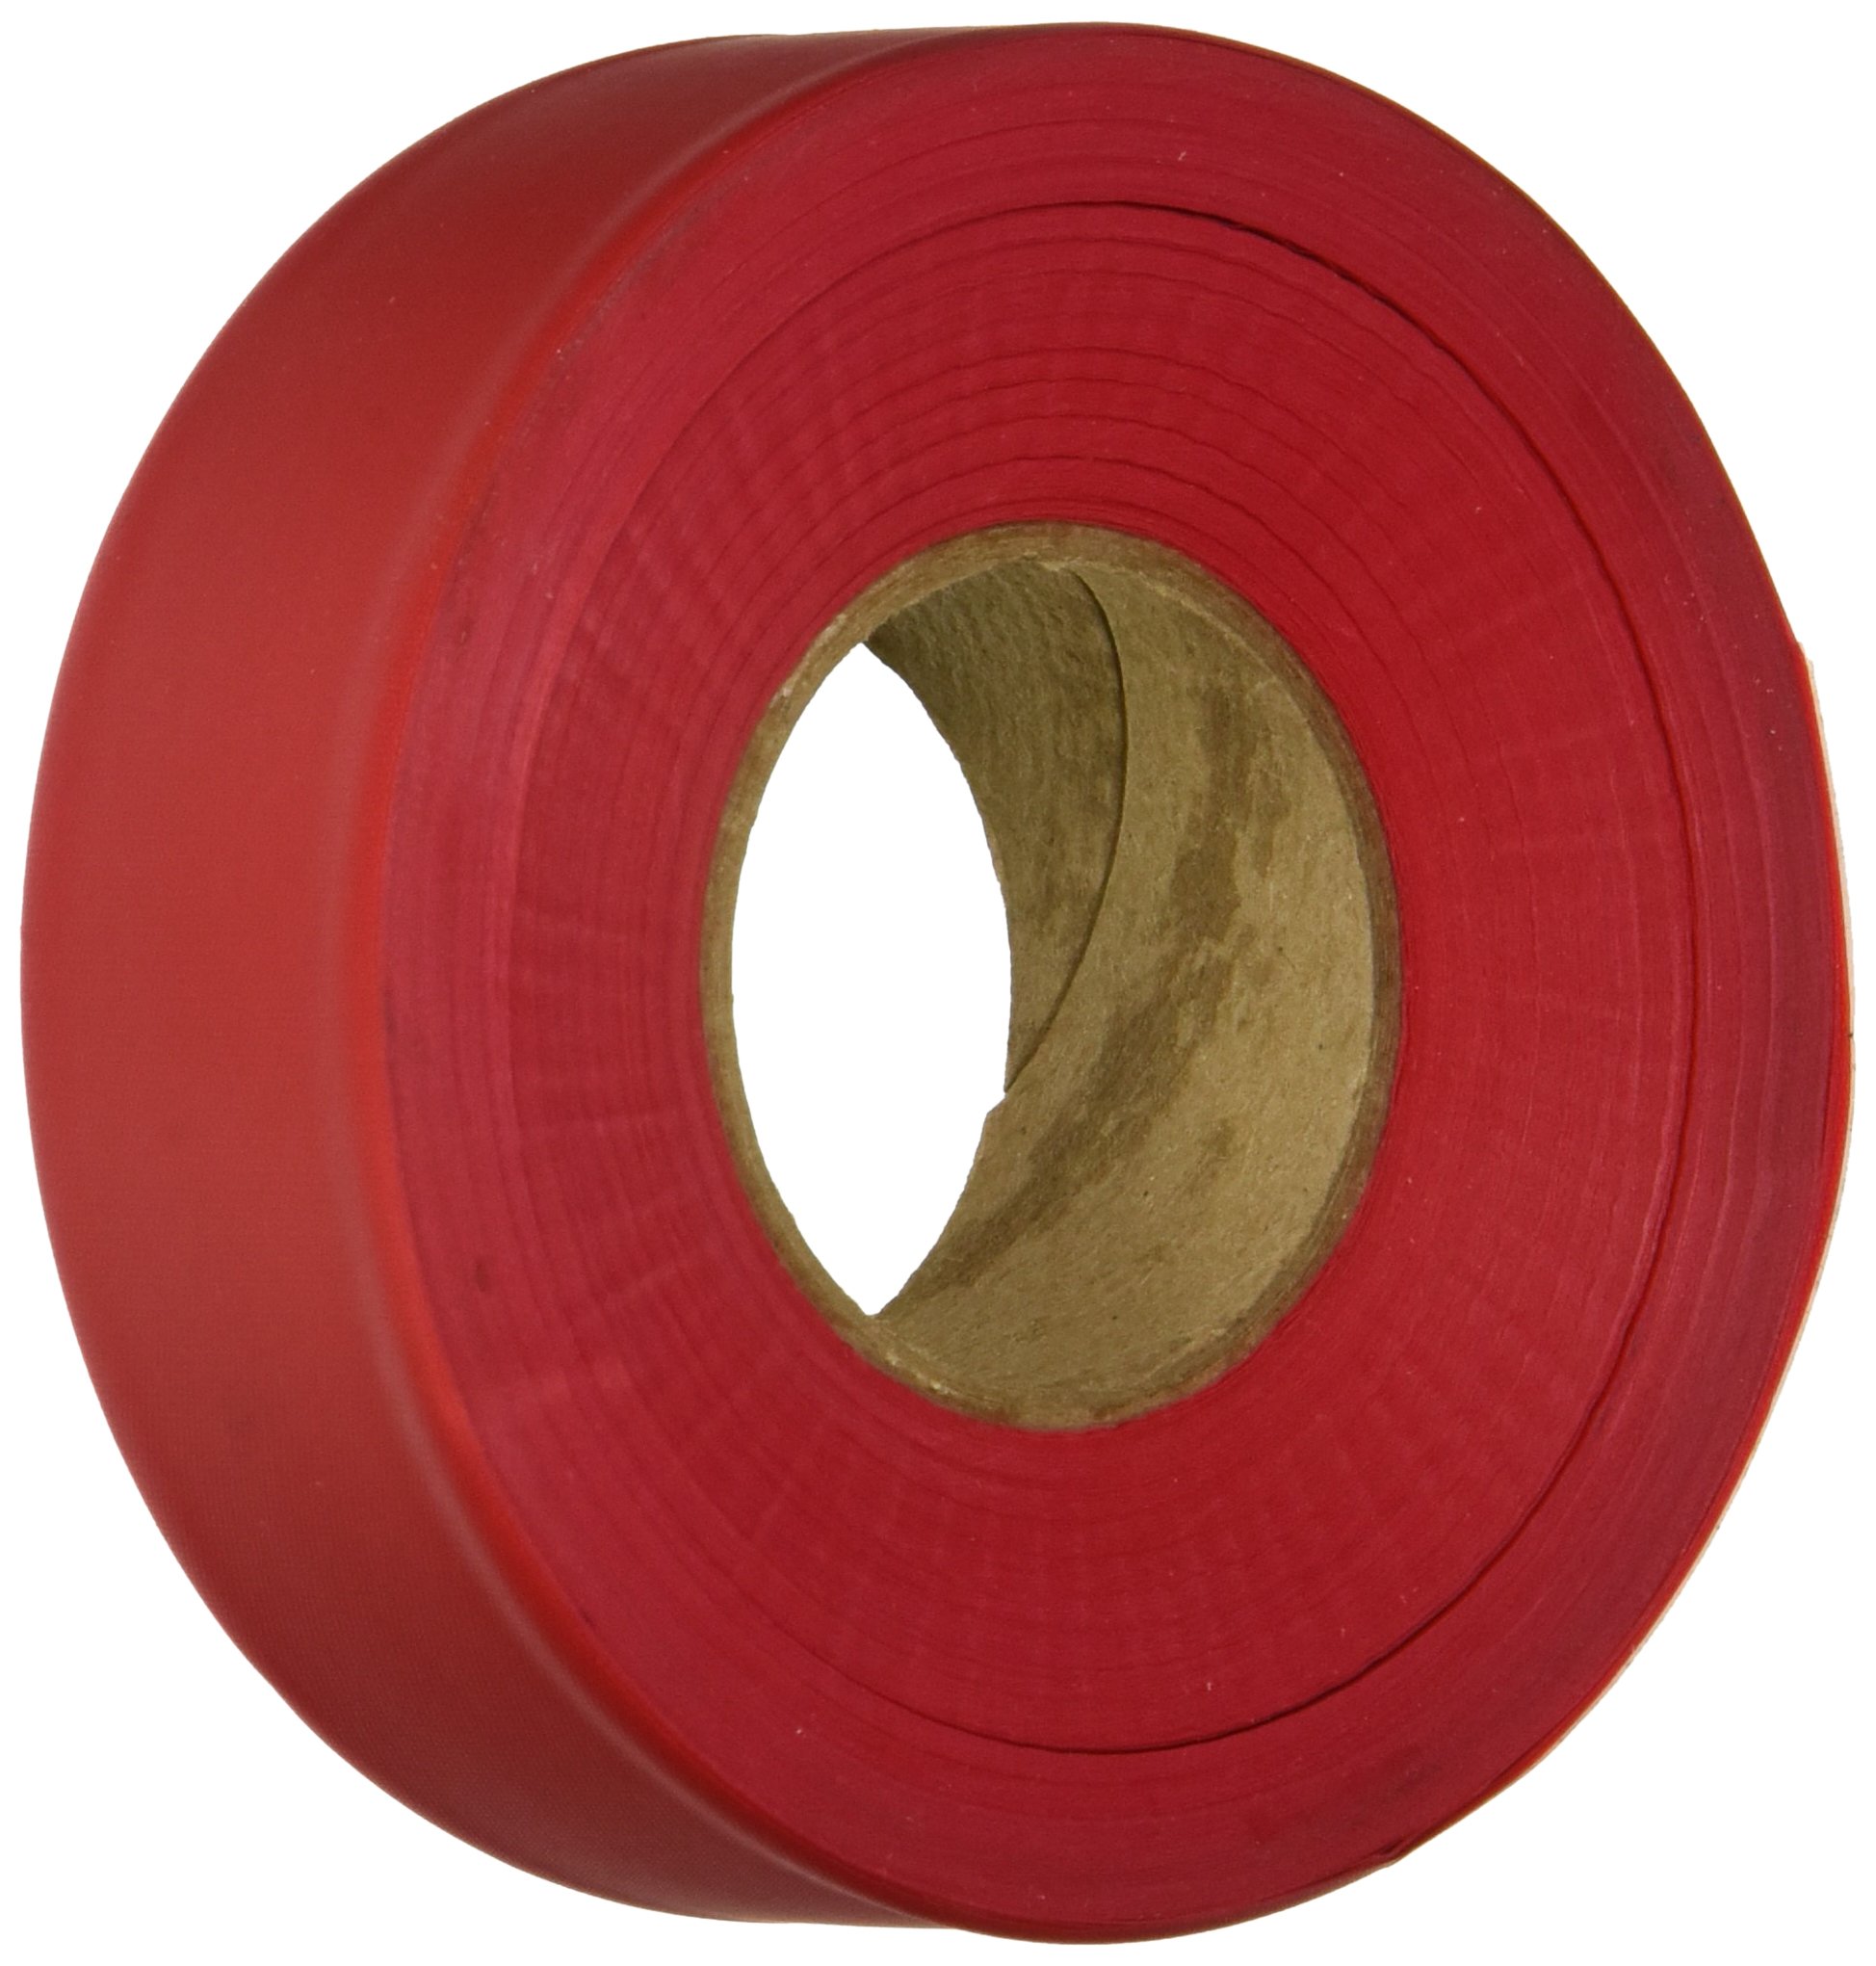 Irwin Tools Strait-Line Flagging Tape: 150' (2 Mils) - Glo-Pink $1.19 Glo Lime $1.35, 300' (1 Mils) - Red $1.35 + Free Shipping w/ Prime or on $35+